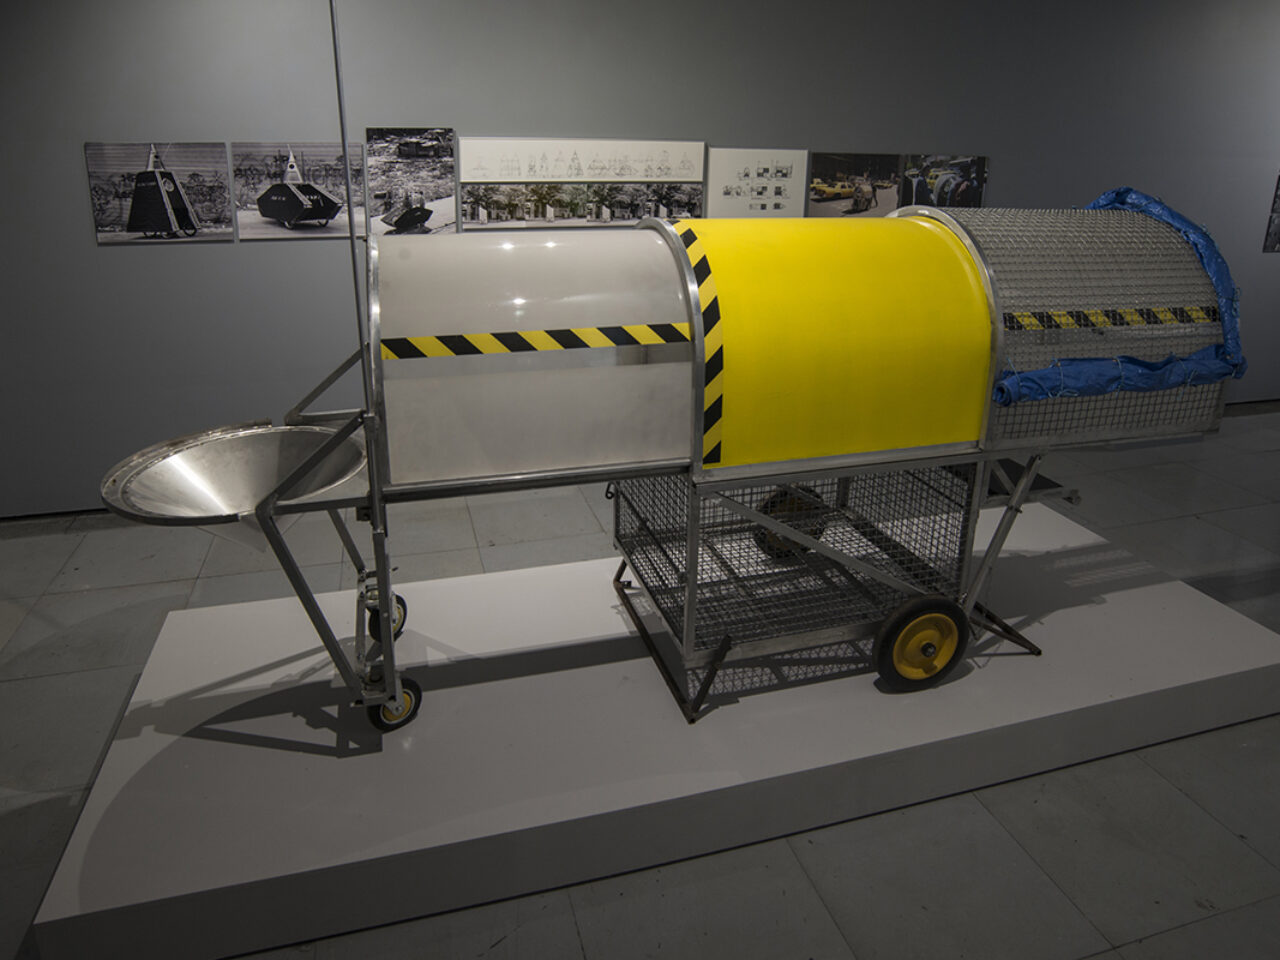 A metal oblong structure on wheels and covered in yellow and black tape.